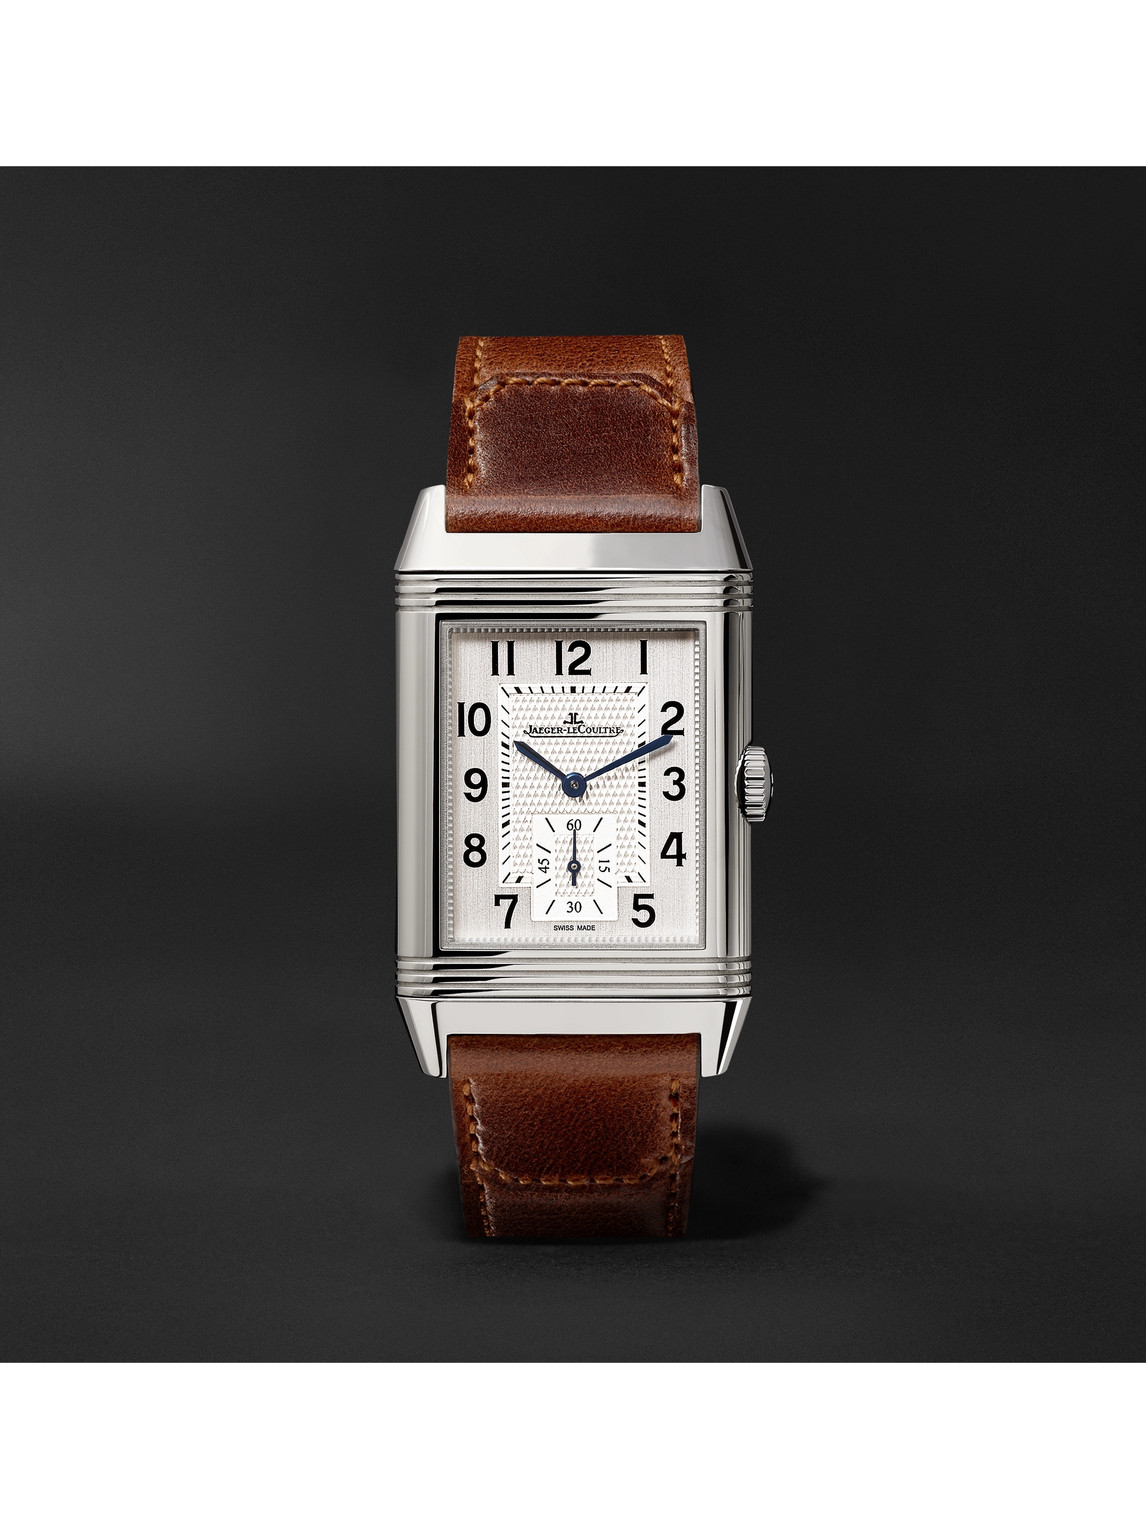 Reverso Classic Medium Hand-Wound 25.5mm Stainless Steel and Leather Watch, Ref. No. Q2438522